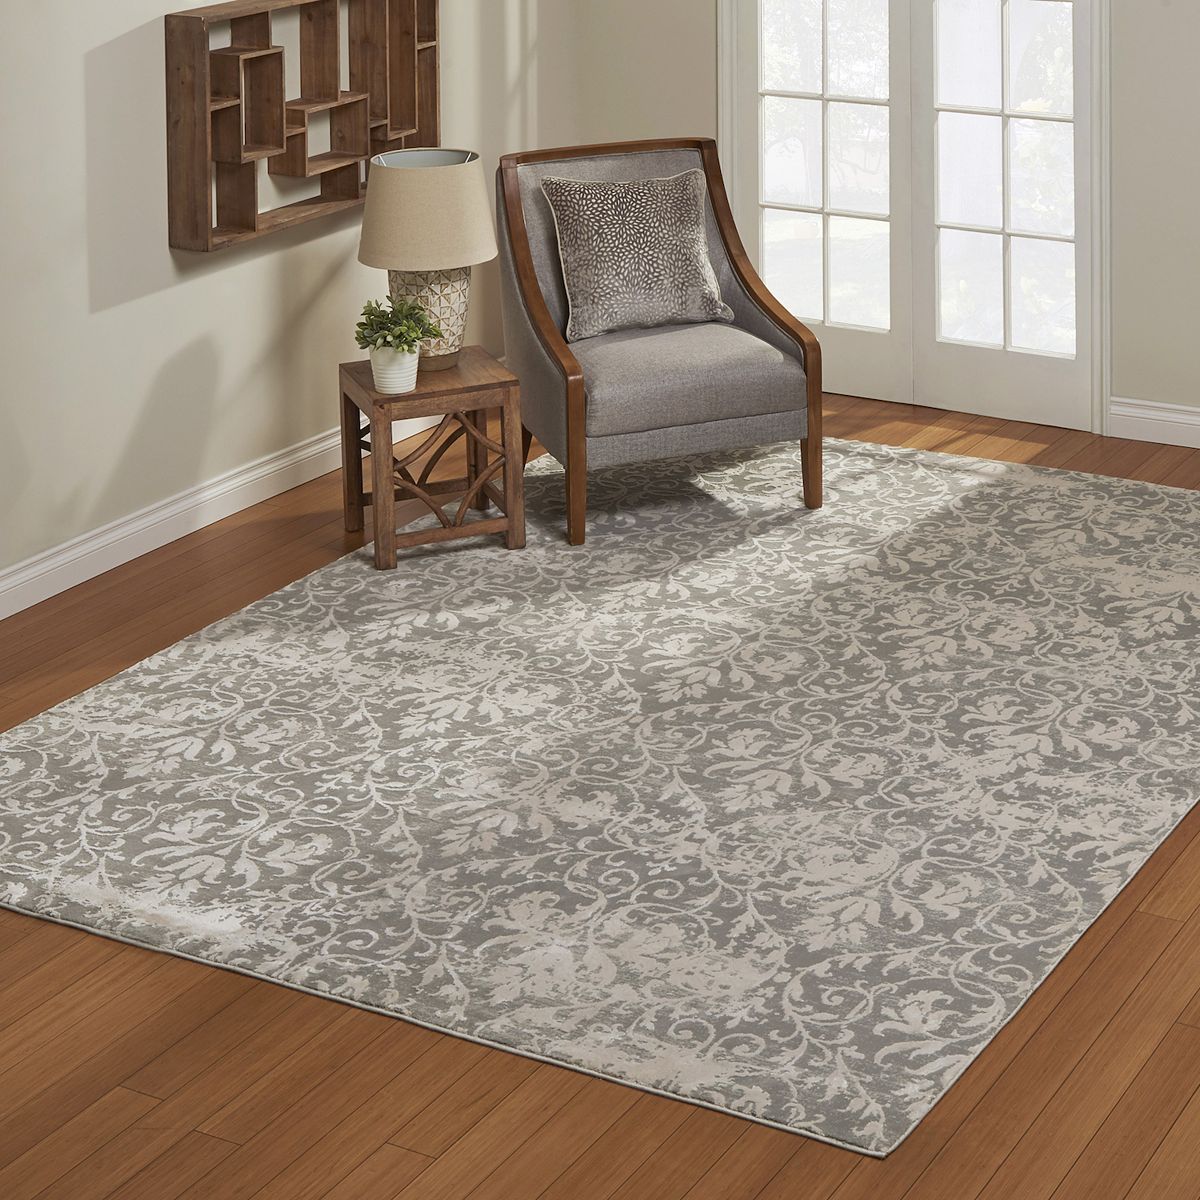 Aurora Collection Chartres Gray Ivory Rug - 6ft 4in X 9ft 6in (195cm X 290cm) HOG-Home Office Garden online marketplace.